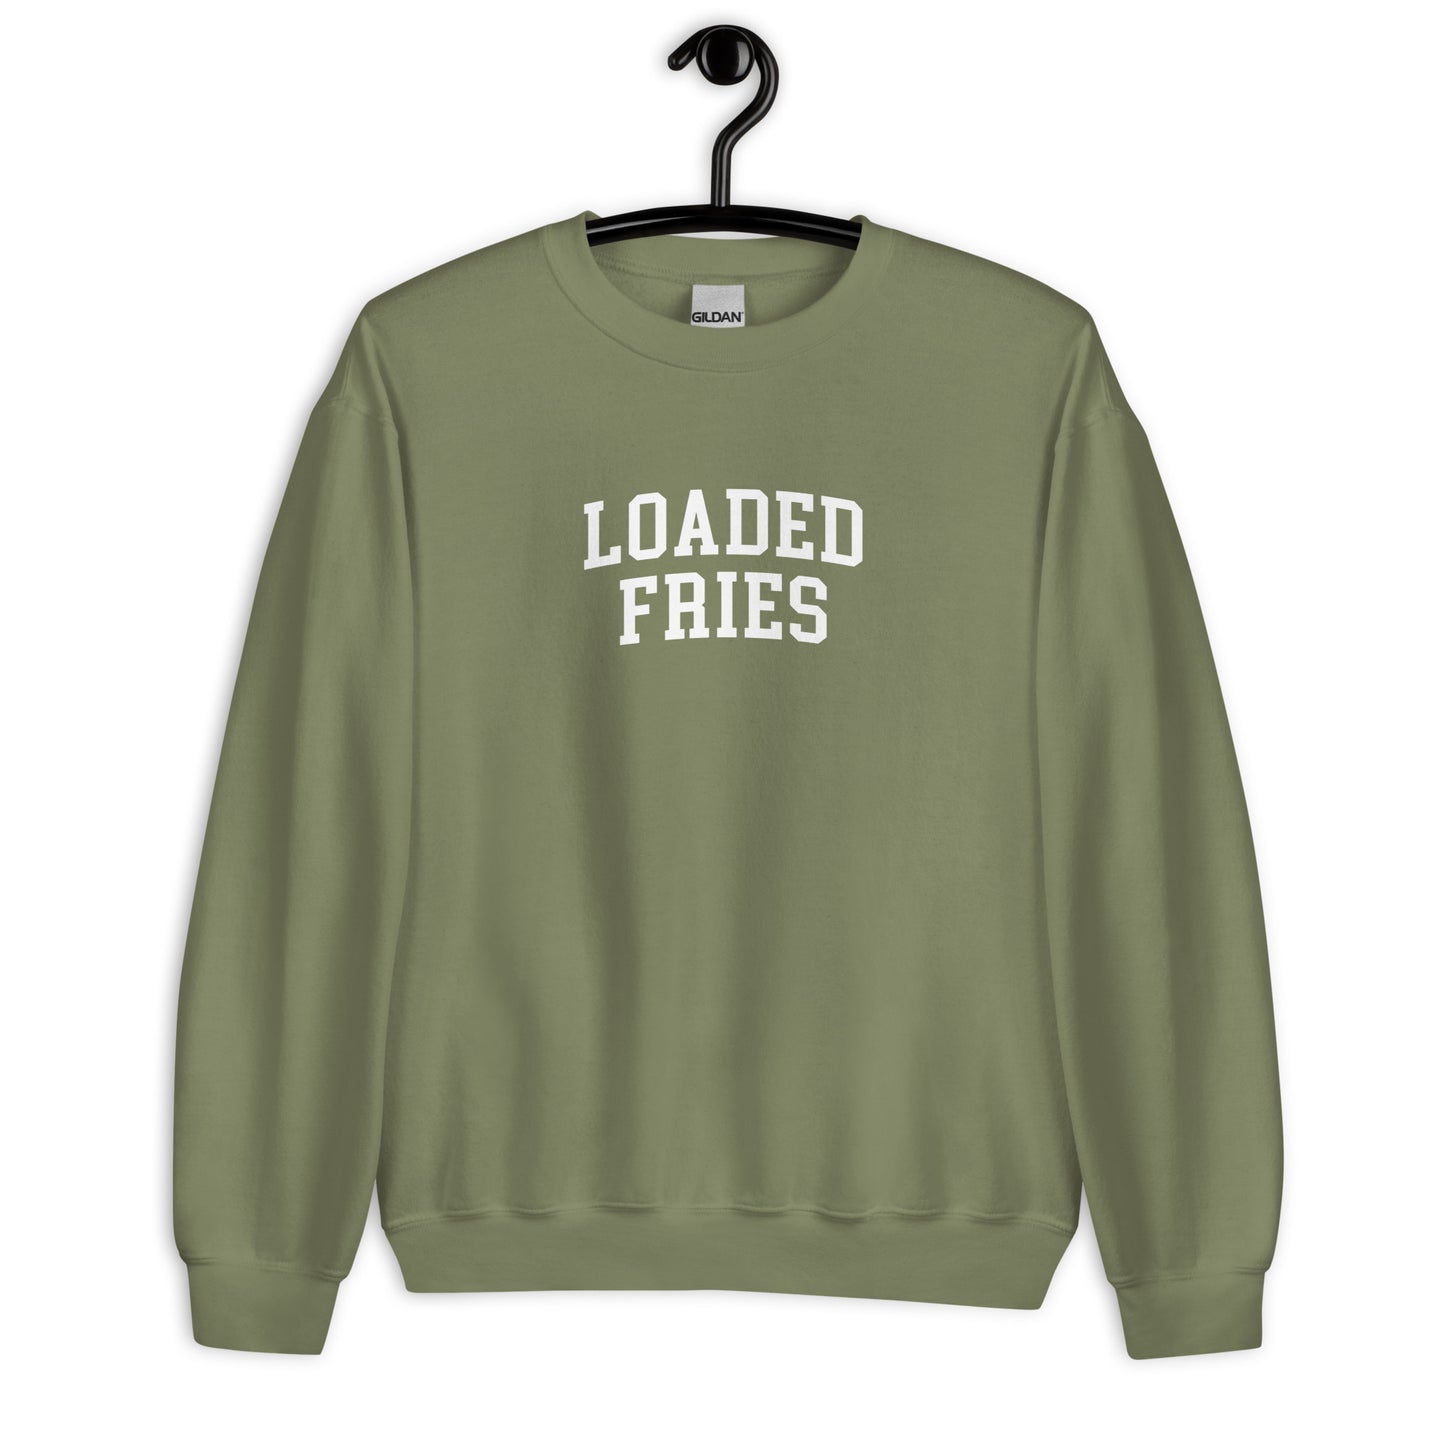 Loaded Fries Sweatshirt - Arched Font